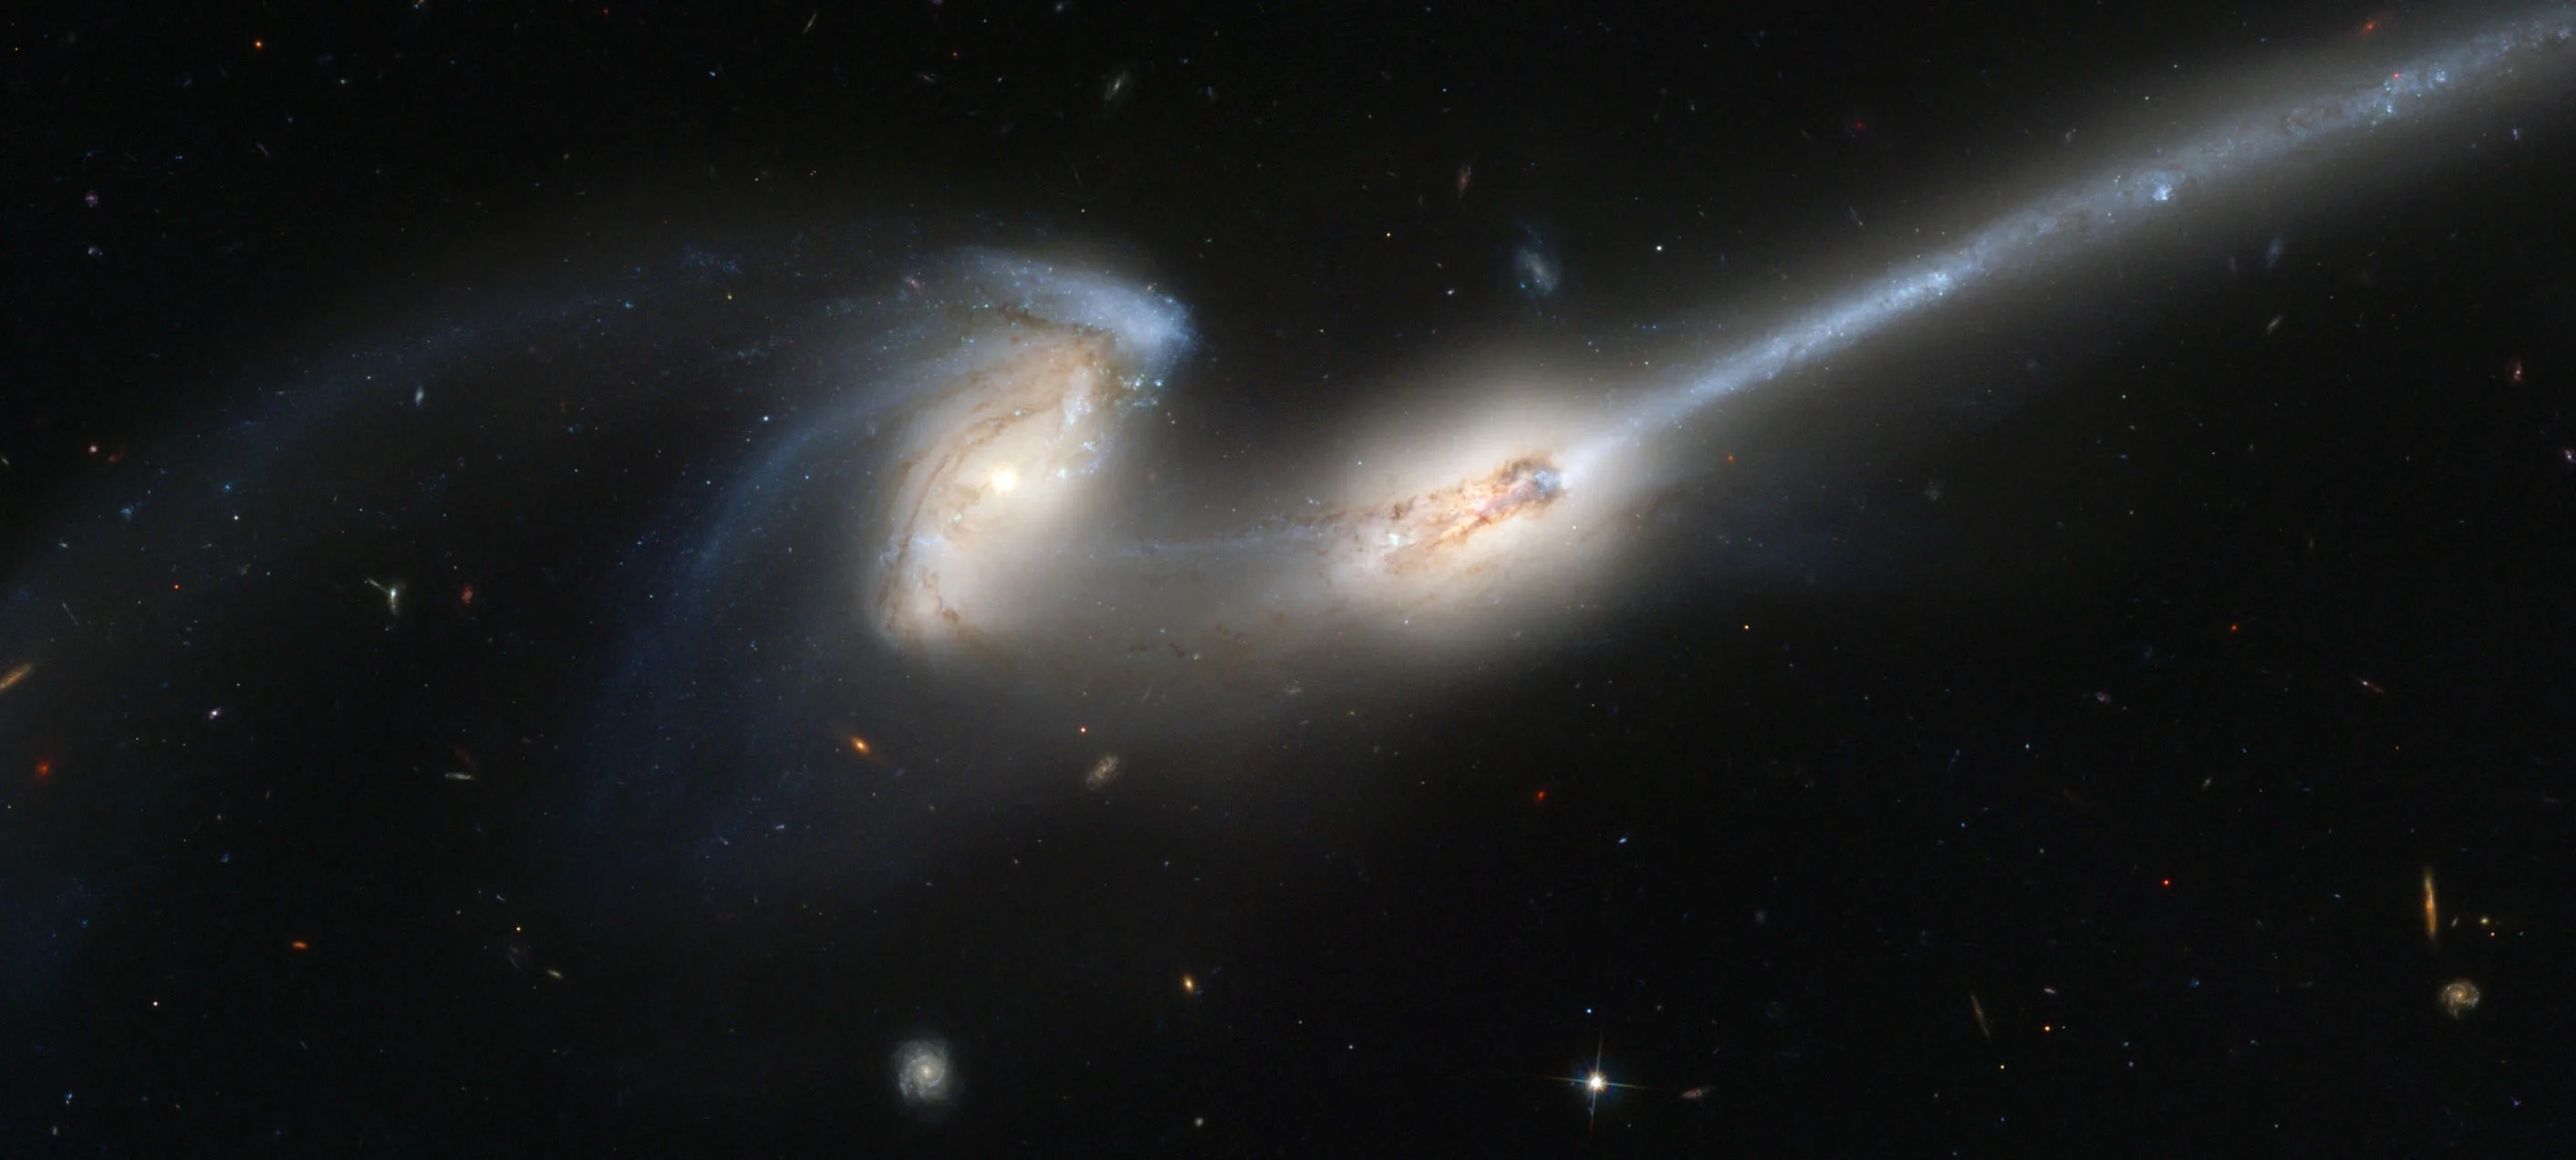 Two interacting galaxies centered in the image. The left galaxy is a spiral galaxy with its arms distorted and drawn out toward the left side of the image. The right galaxy has a long tail that extends to the upper-right corner of the image. Gas and dust also extends between the two galaxies.